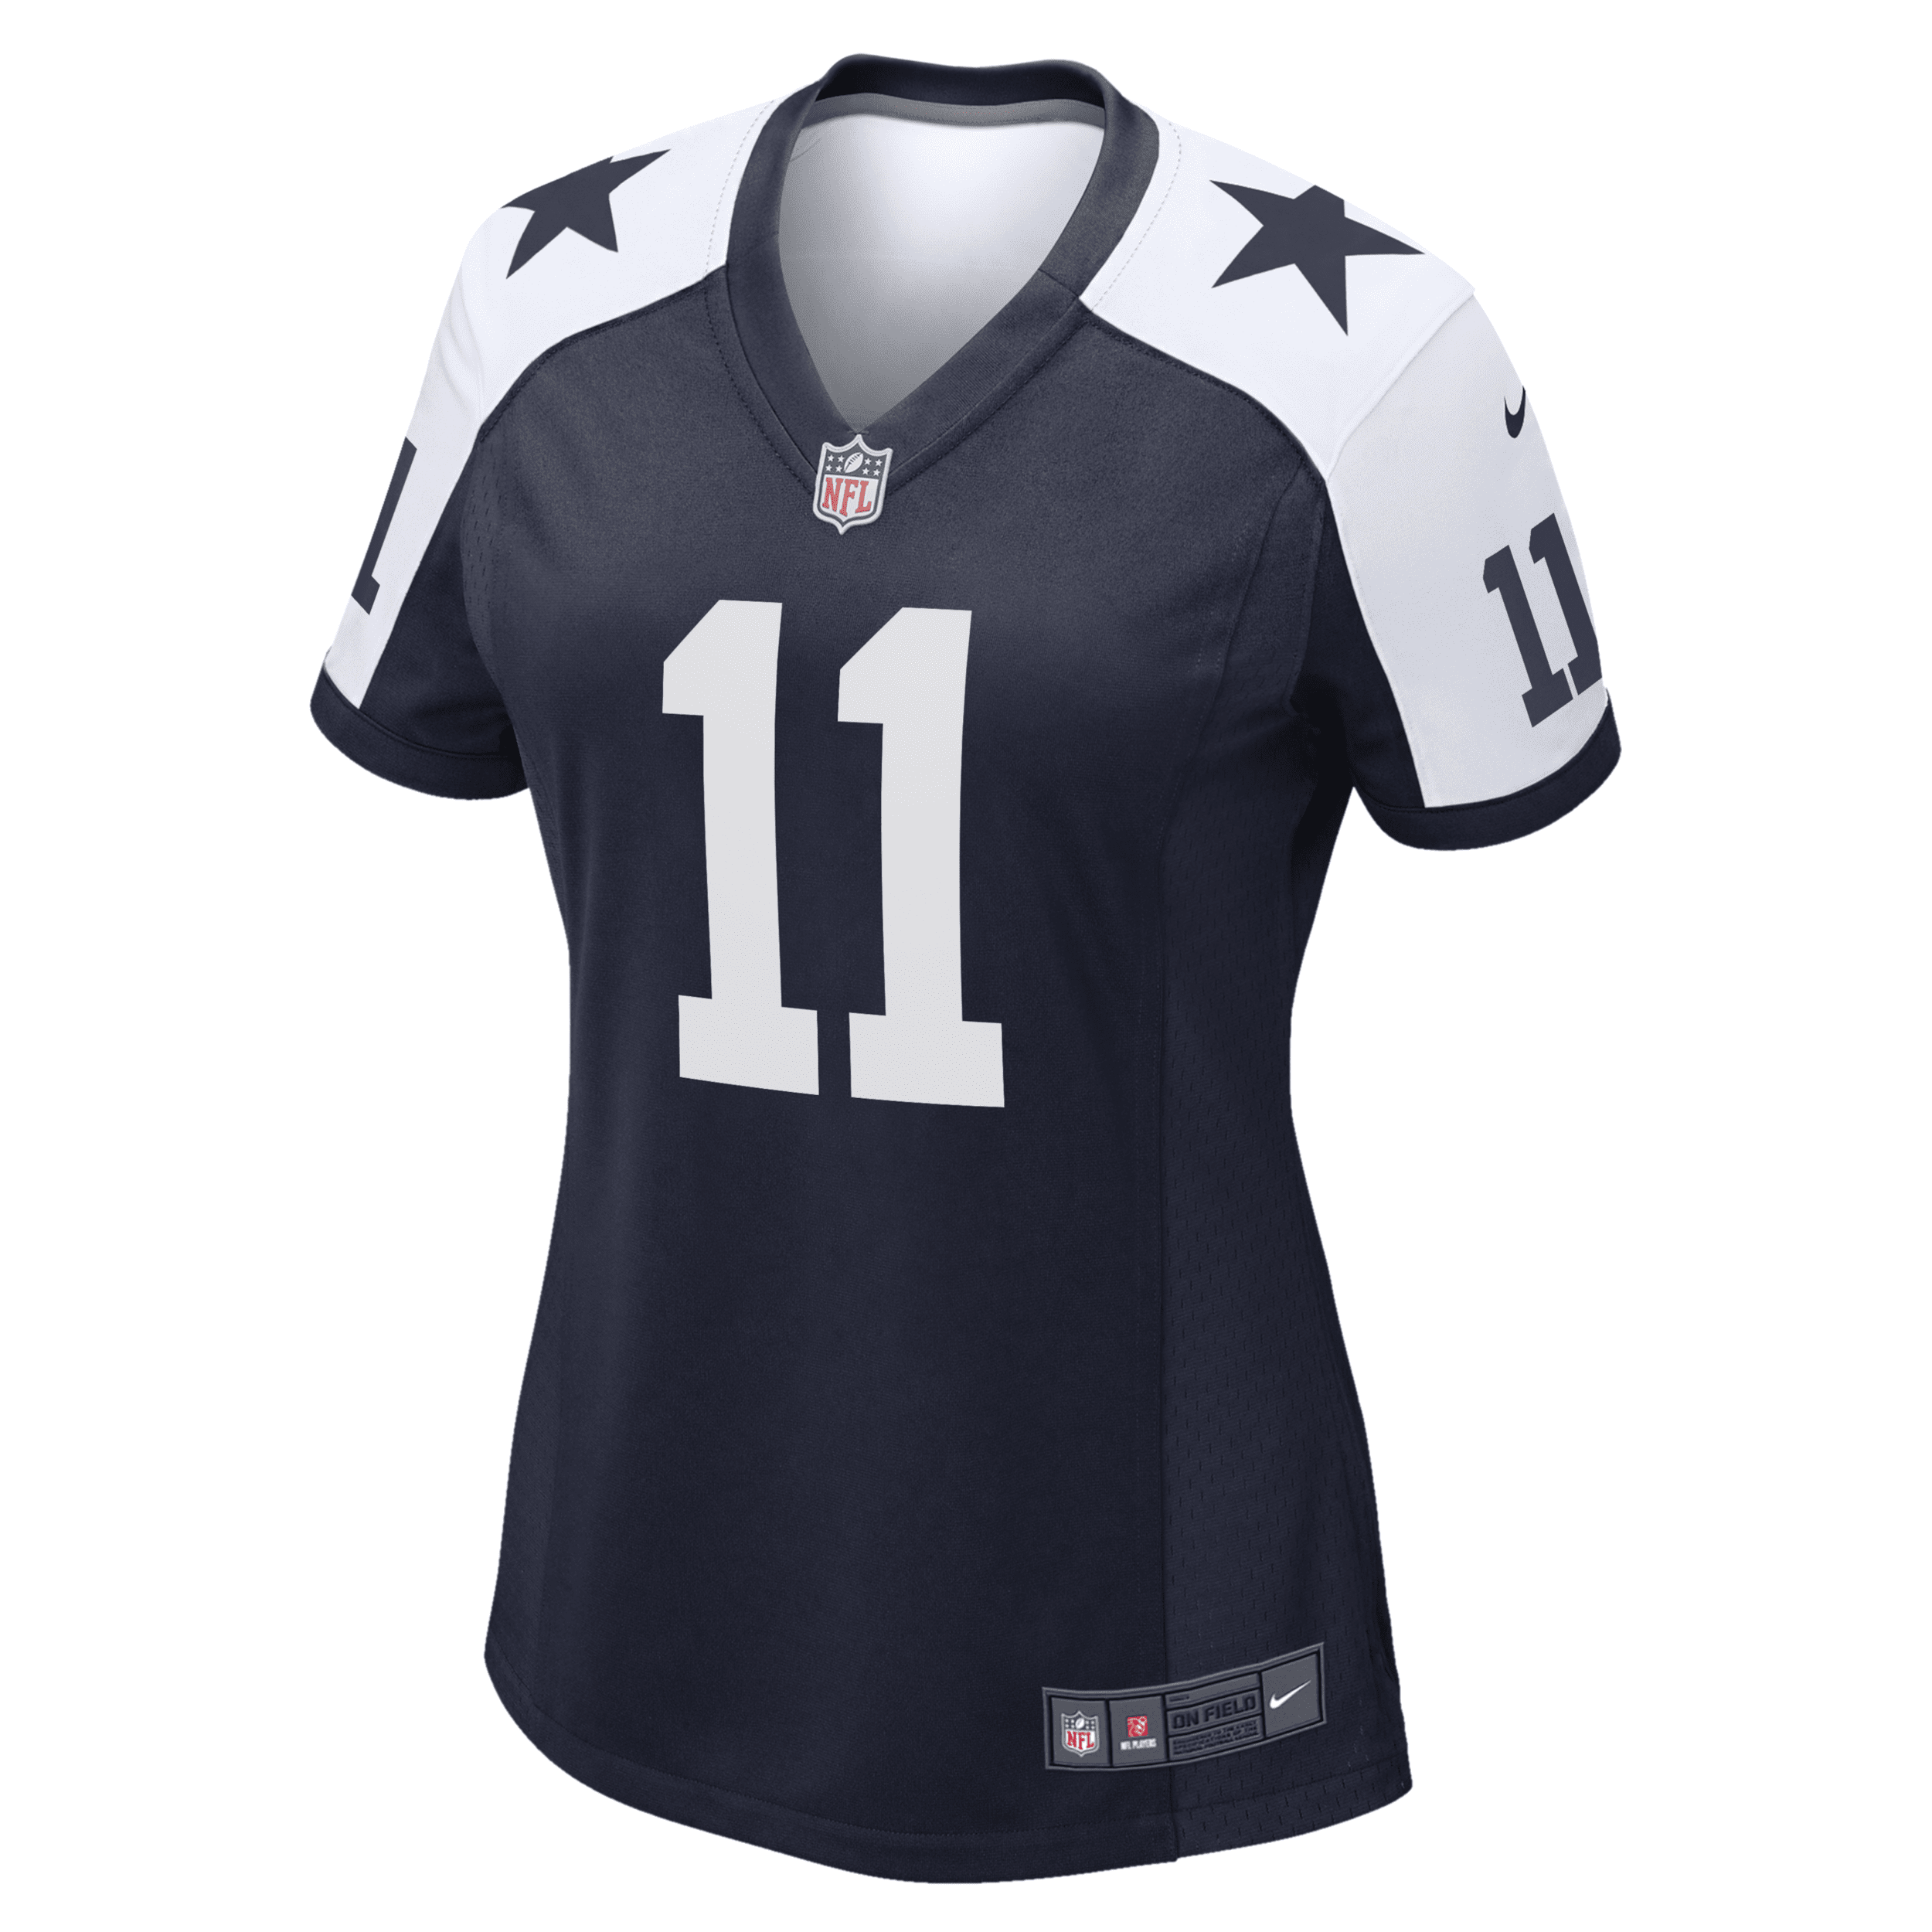 Nike Women's Nfl Dallas Cowboys (micah Parsons) Game Football Jersey In Blue